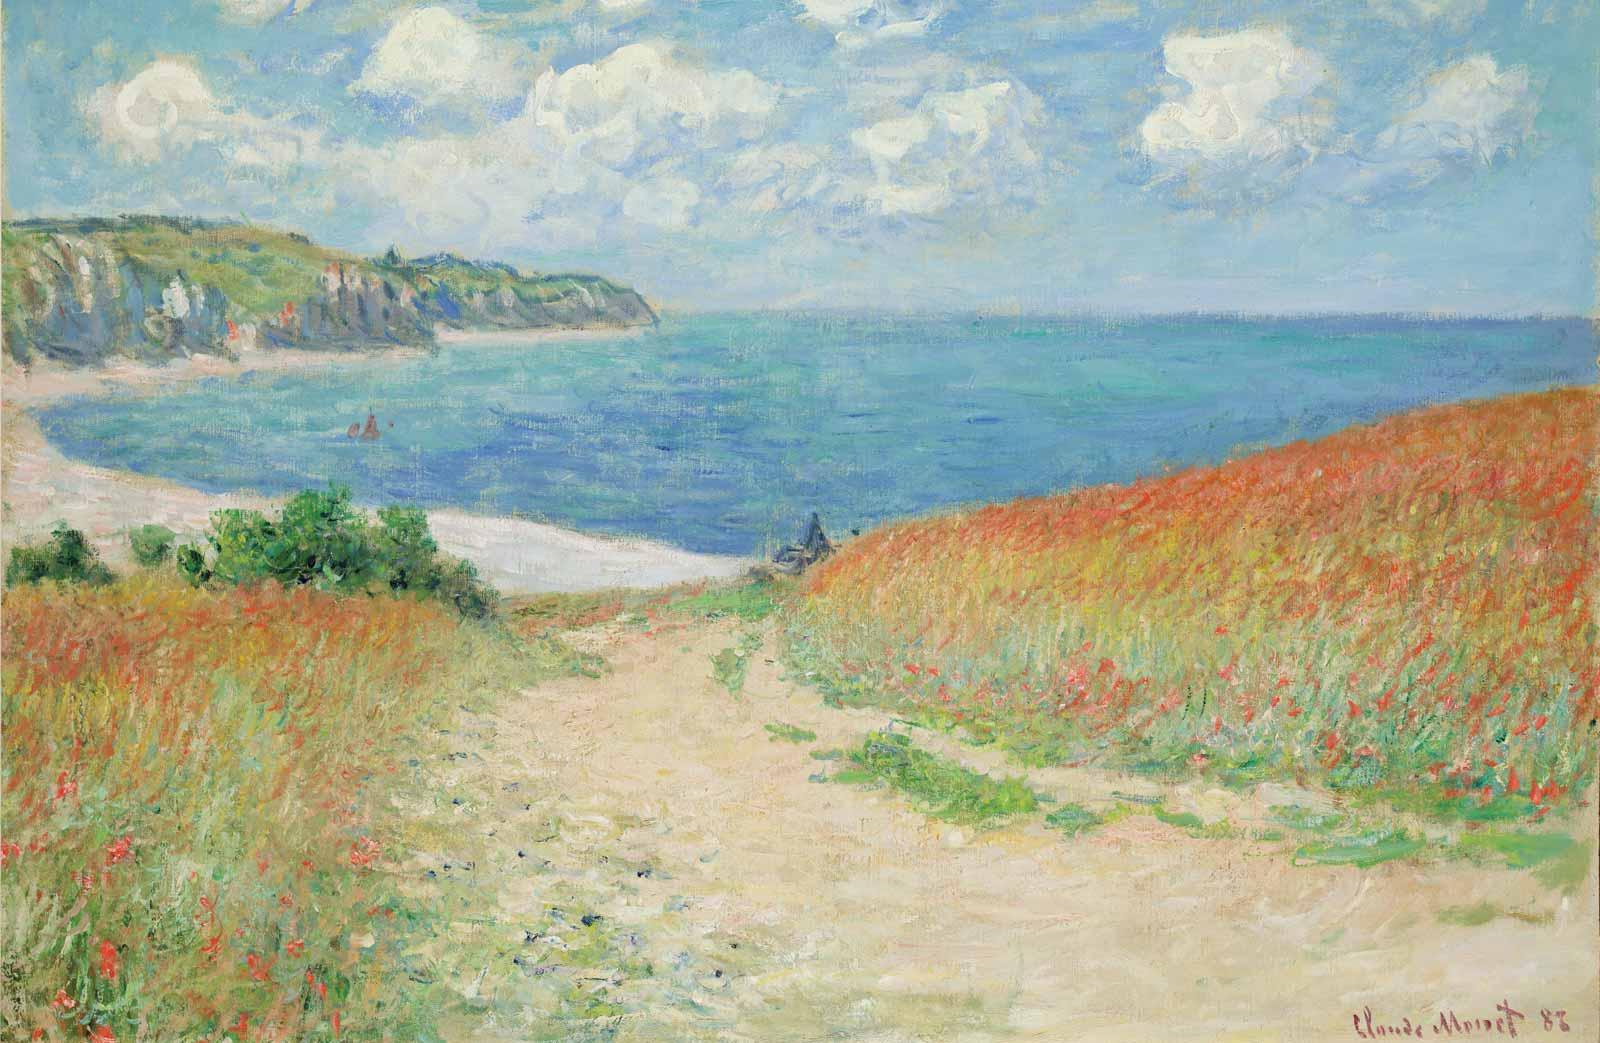 Claude Monet, Path in the Wheat Fields at Pourville, 1882.